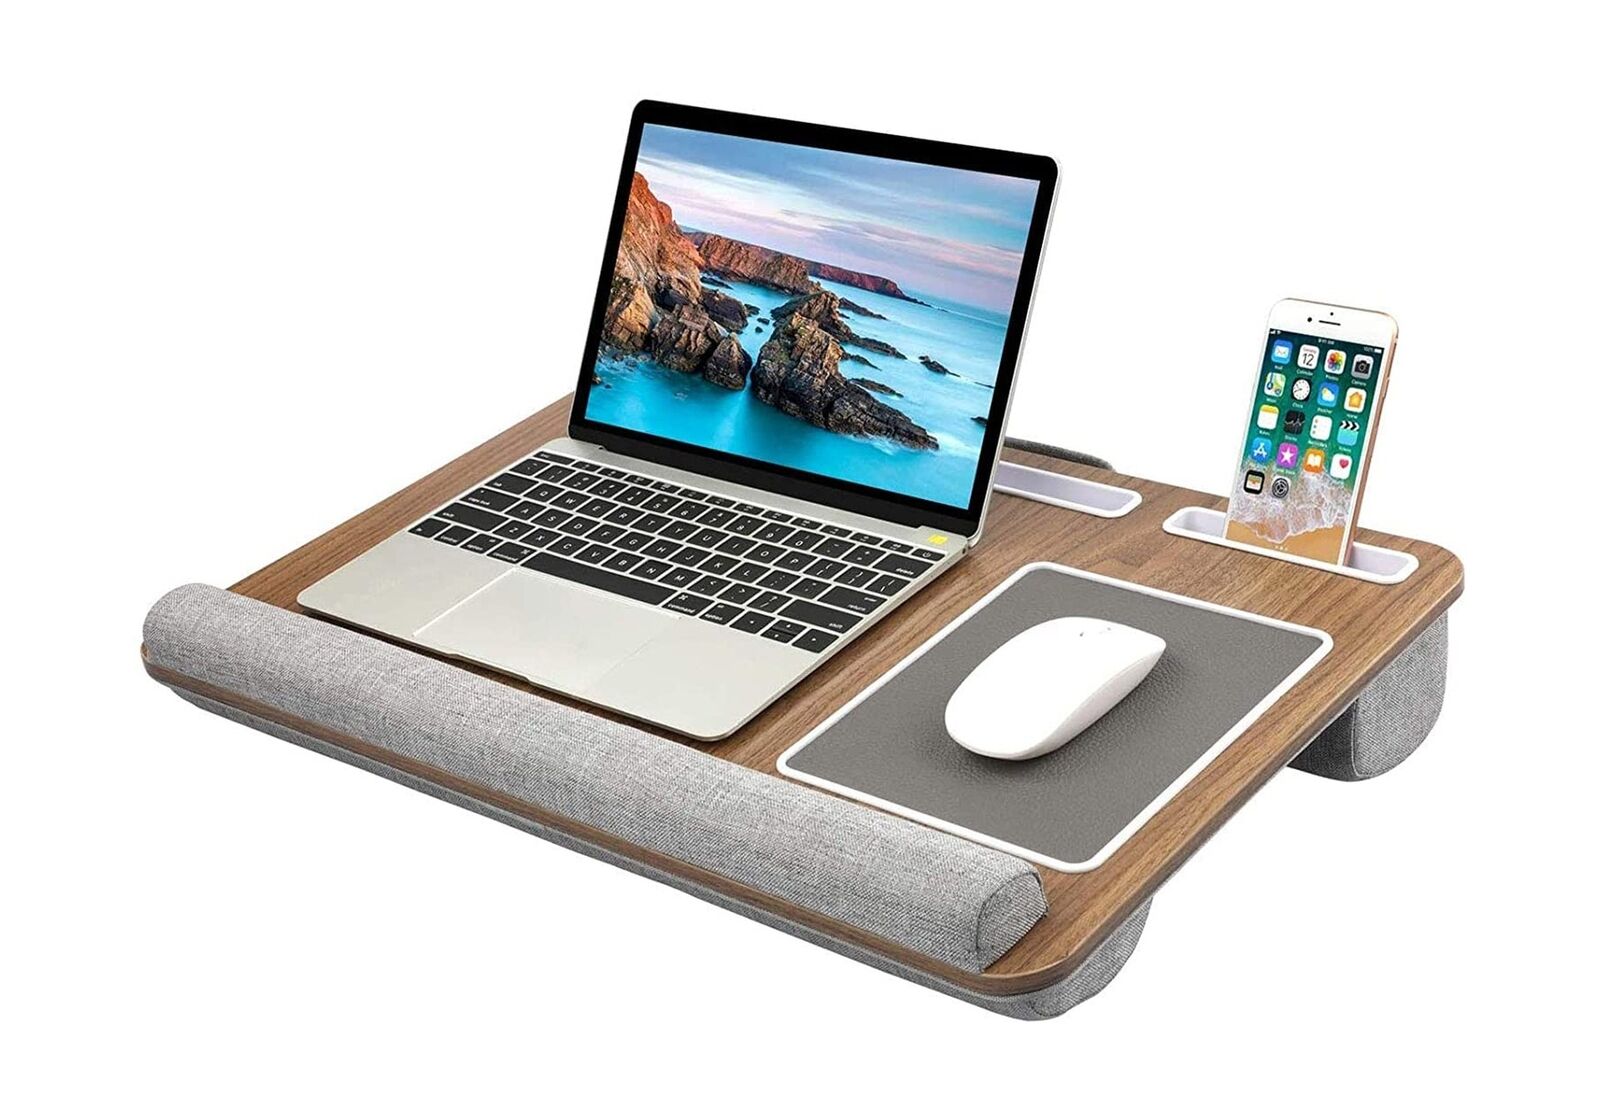 HUANUO Lap Desk - Fits up to 17 inches Laptop Desk, Built in Mouse Pad & Wris...